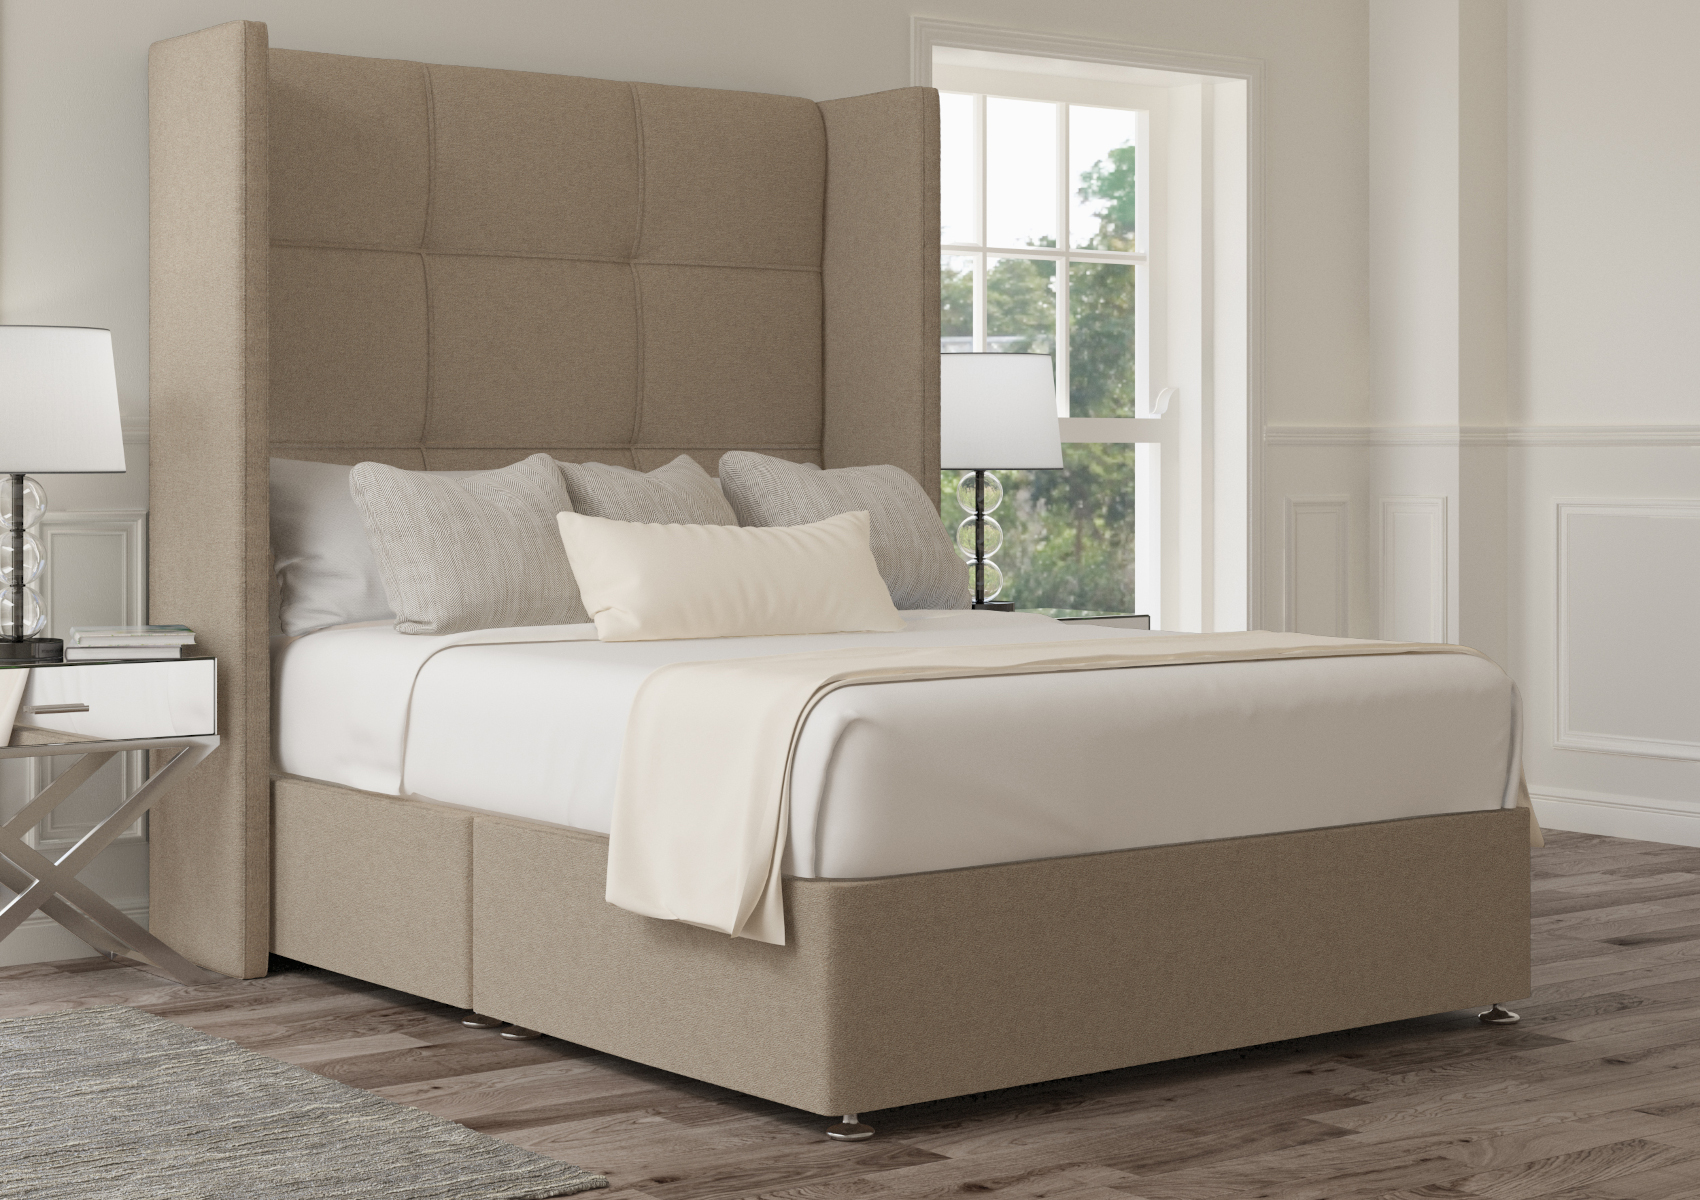 View Oaklyn Arran Natural Upholstered Super King Winged Bed Time4Sleep information